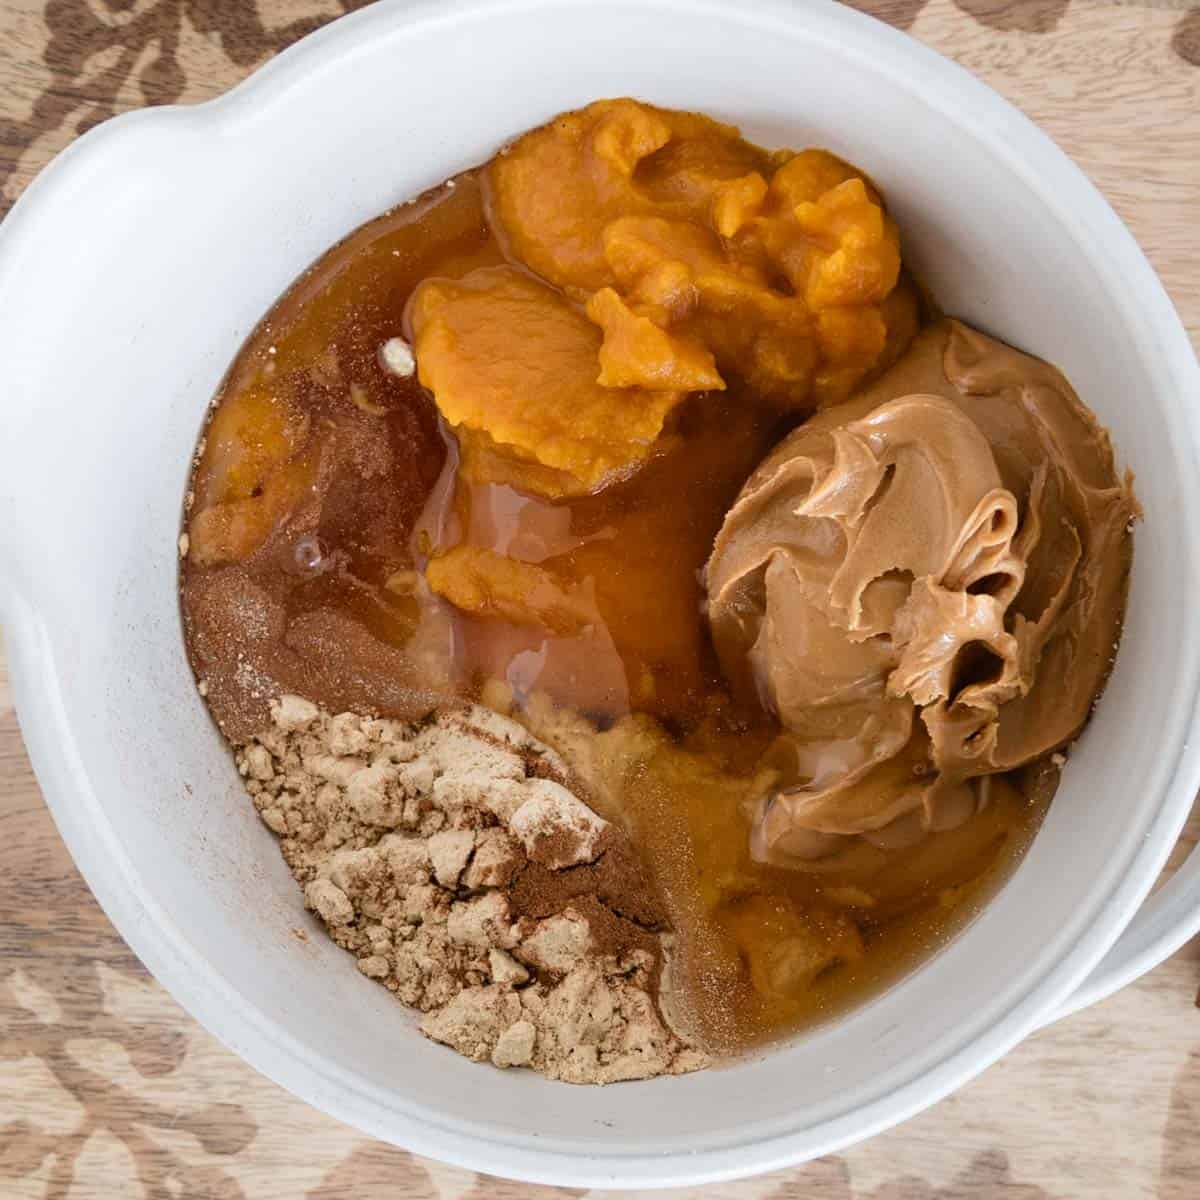 bowl with pumpkin, oat flour, peanut butter and other unmixed ingredients